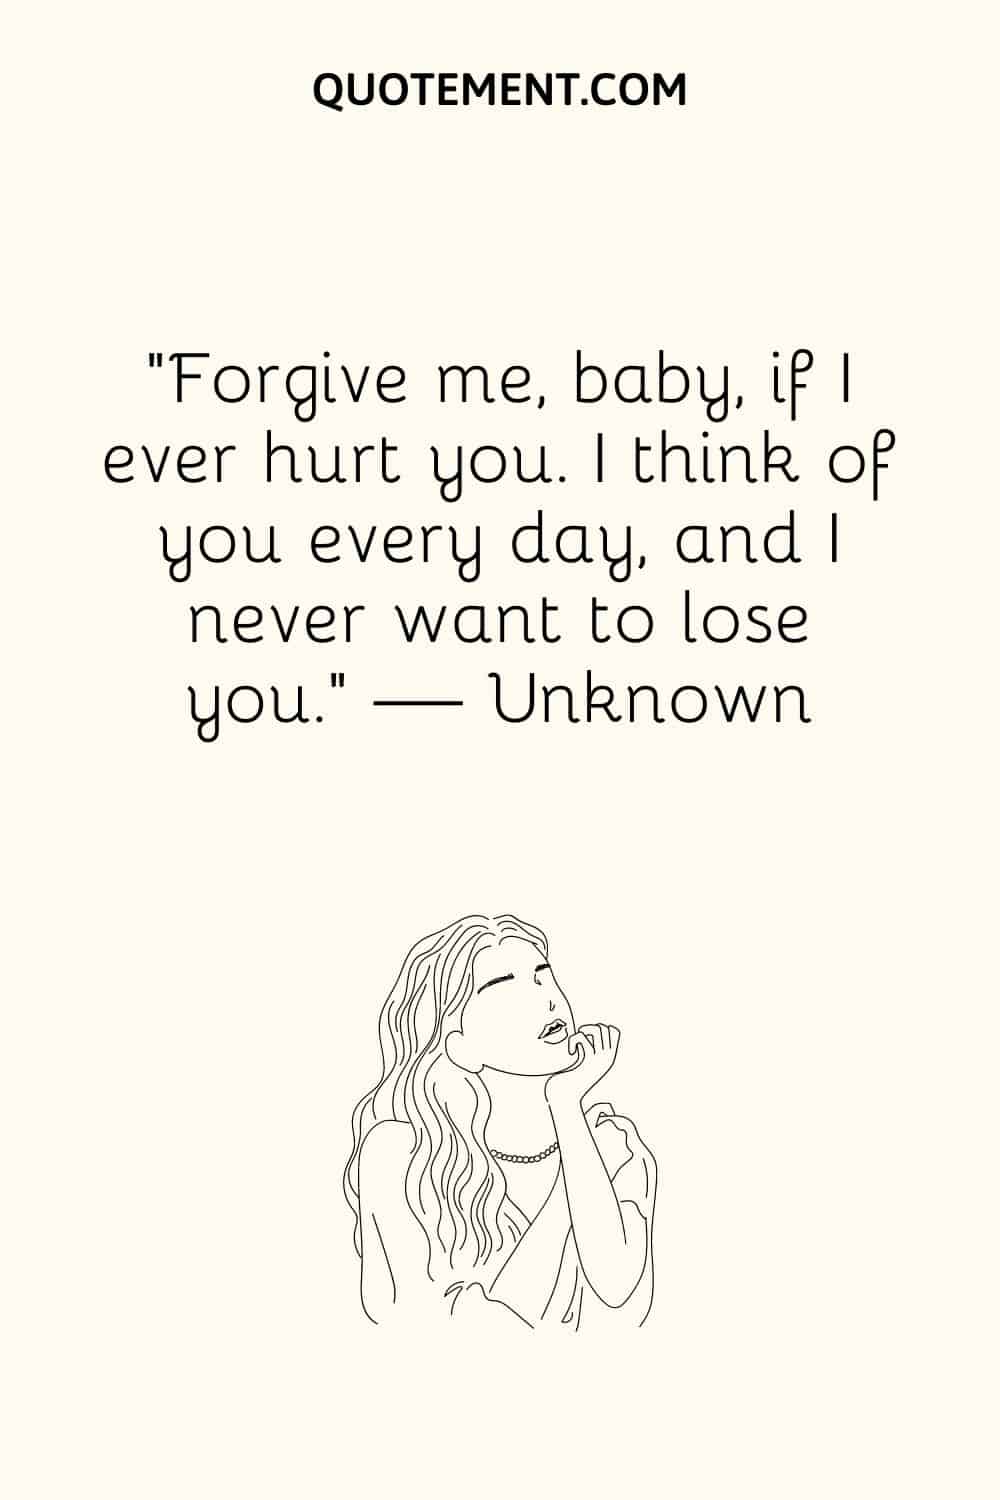 “Forgive me, baby, if I ever hurt you. I think of you every day, and I never want to lose you.” — unknown